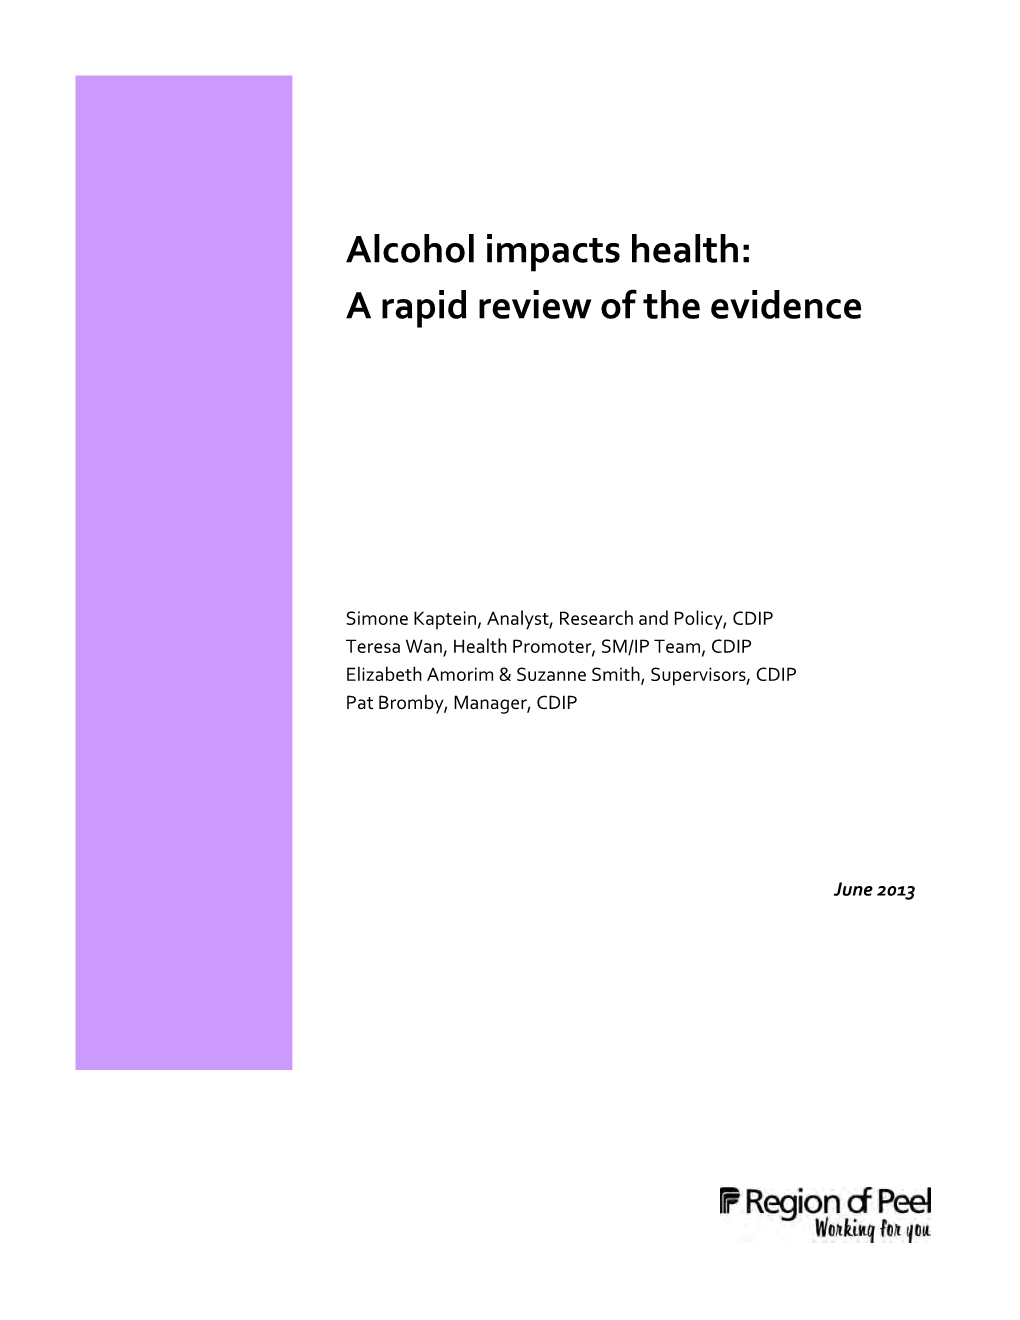 Alcohol Impacts Health: a Rapid Review of the Evidence